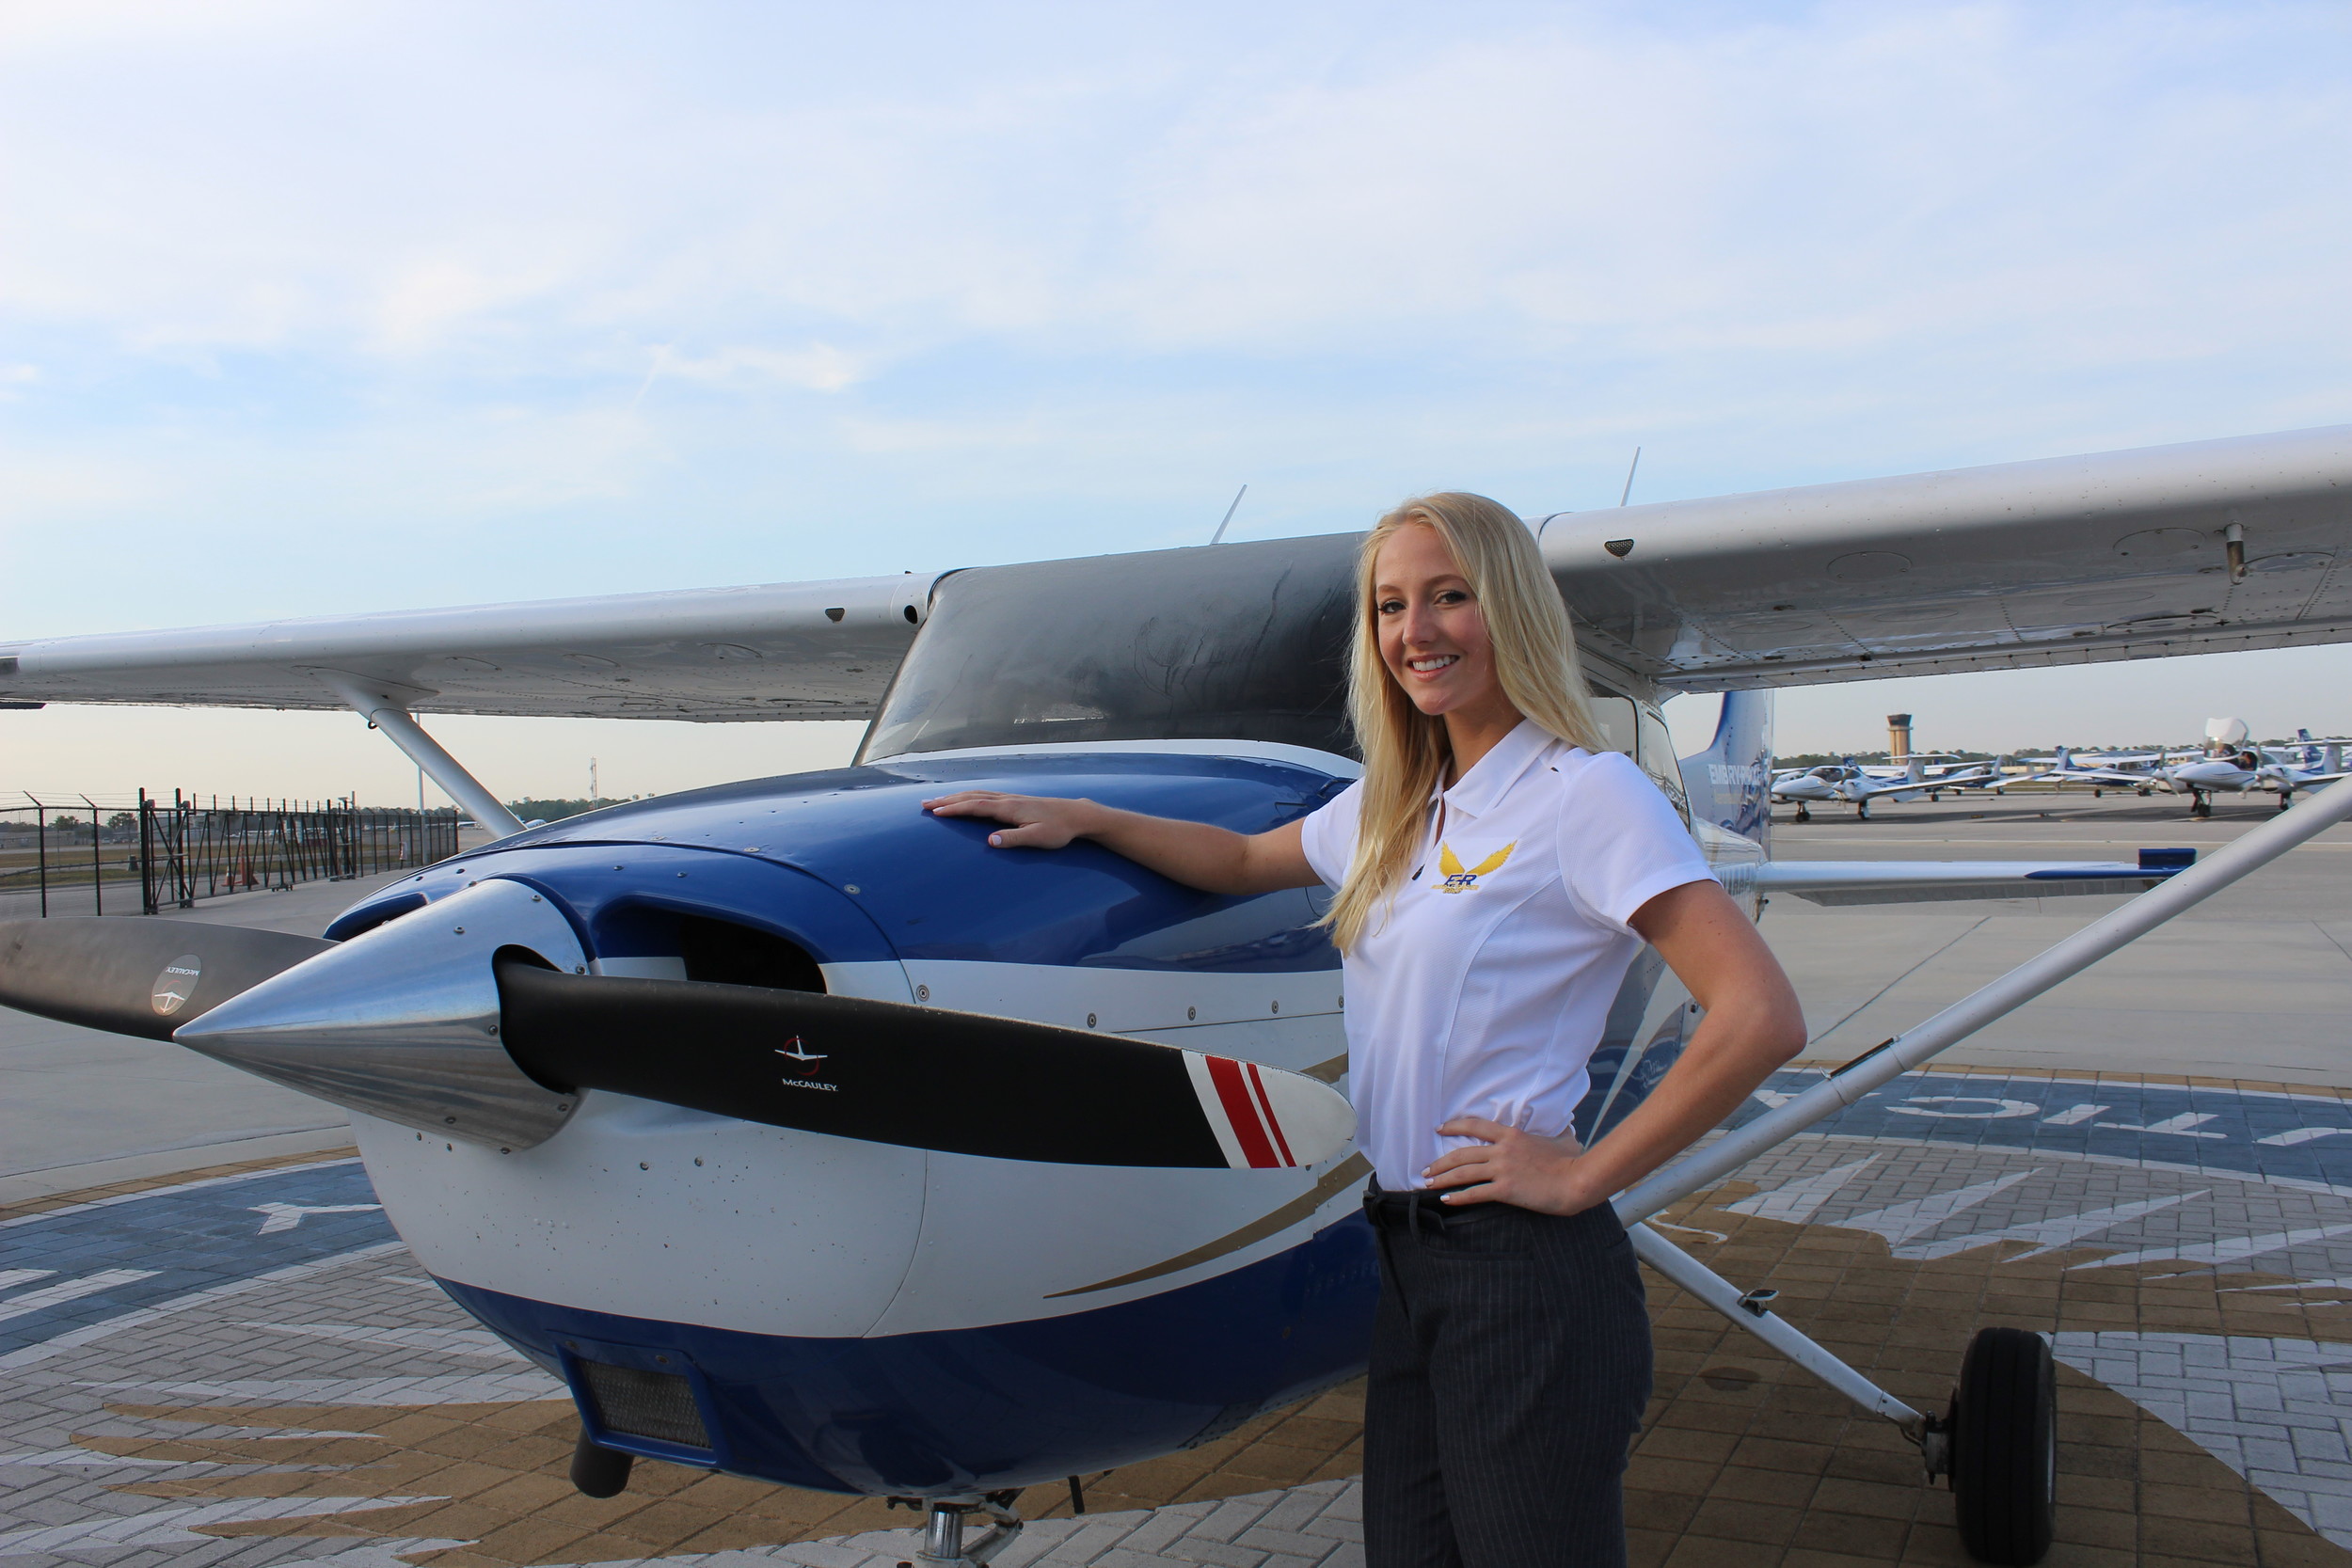 Embry-Riddle University pilot Mia Hallgring, a Portsmouth High graduate, poses with the school’s Cessna 172 Skyhawk before leaving for the start of the 2018 Air Race Classic in Sweetwater, Texas.